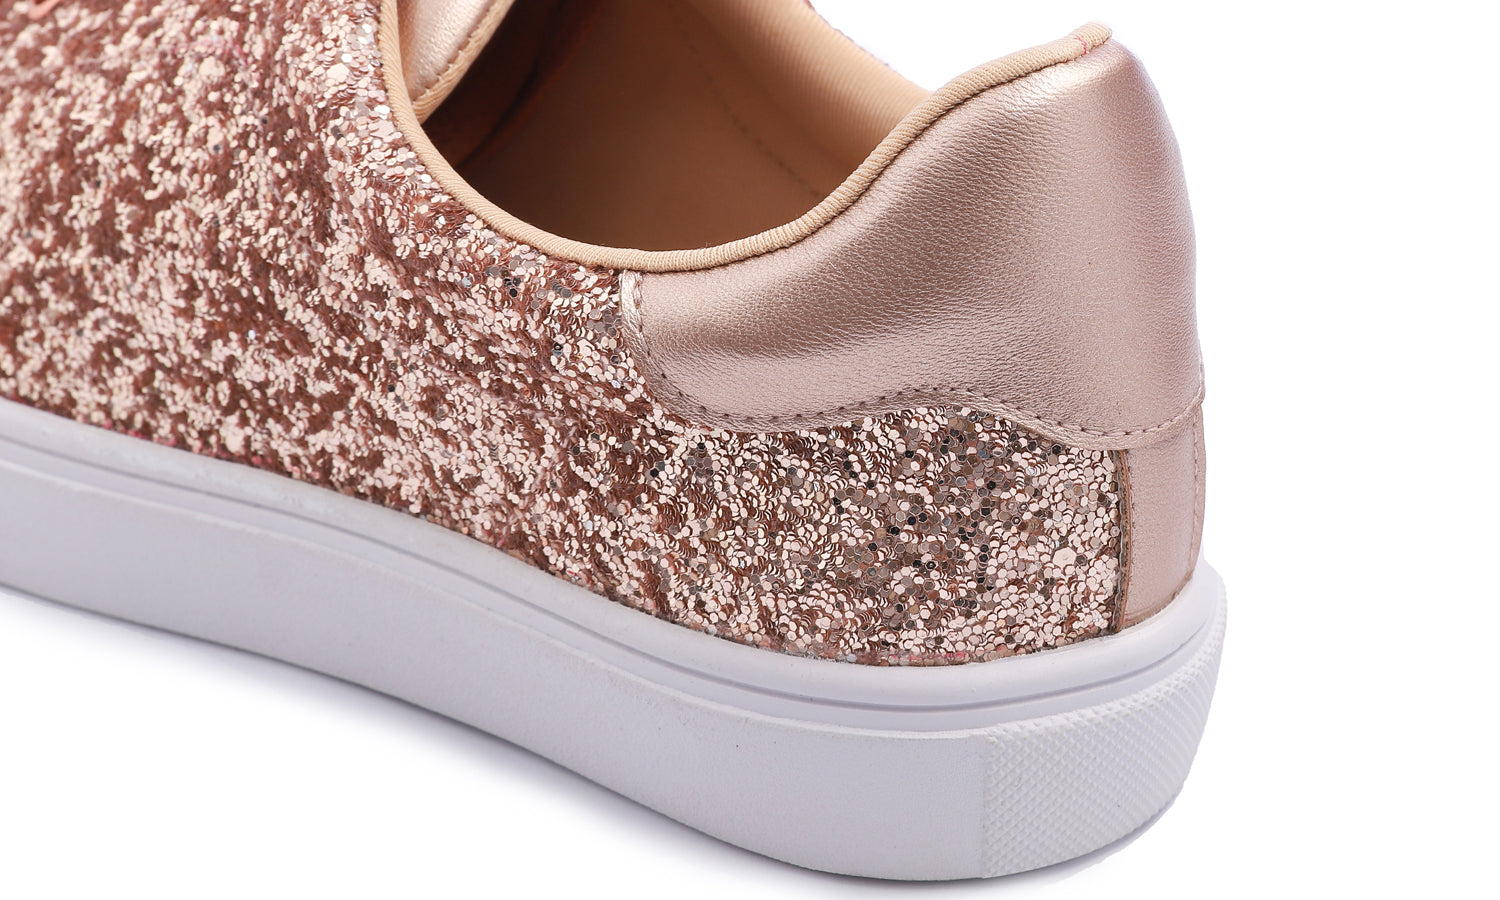 Feversole Women's Fashion Dress Sneakers Party Bling Casual Flats Embellished Shoes Rose Gold Glitter Lace